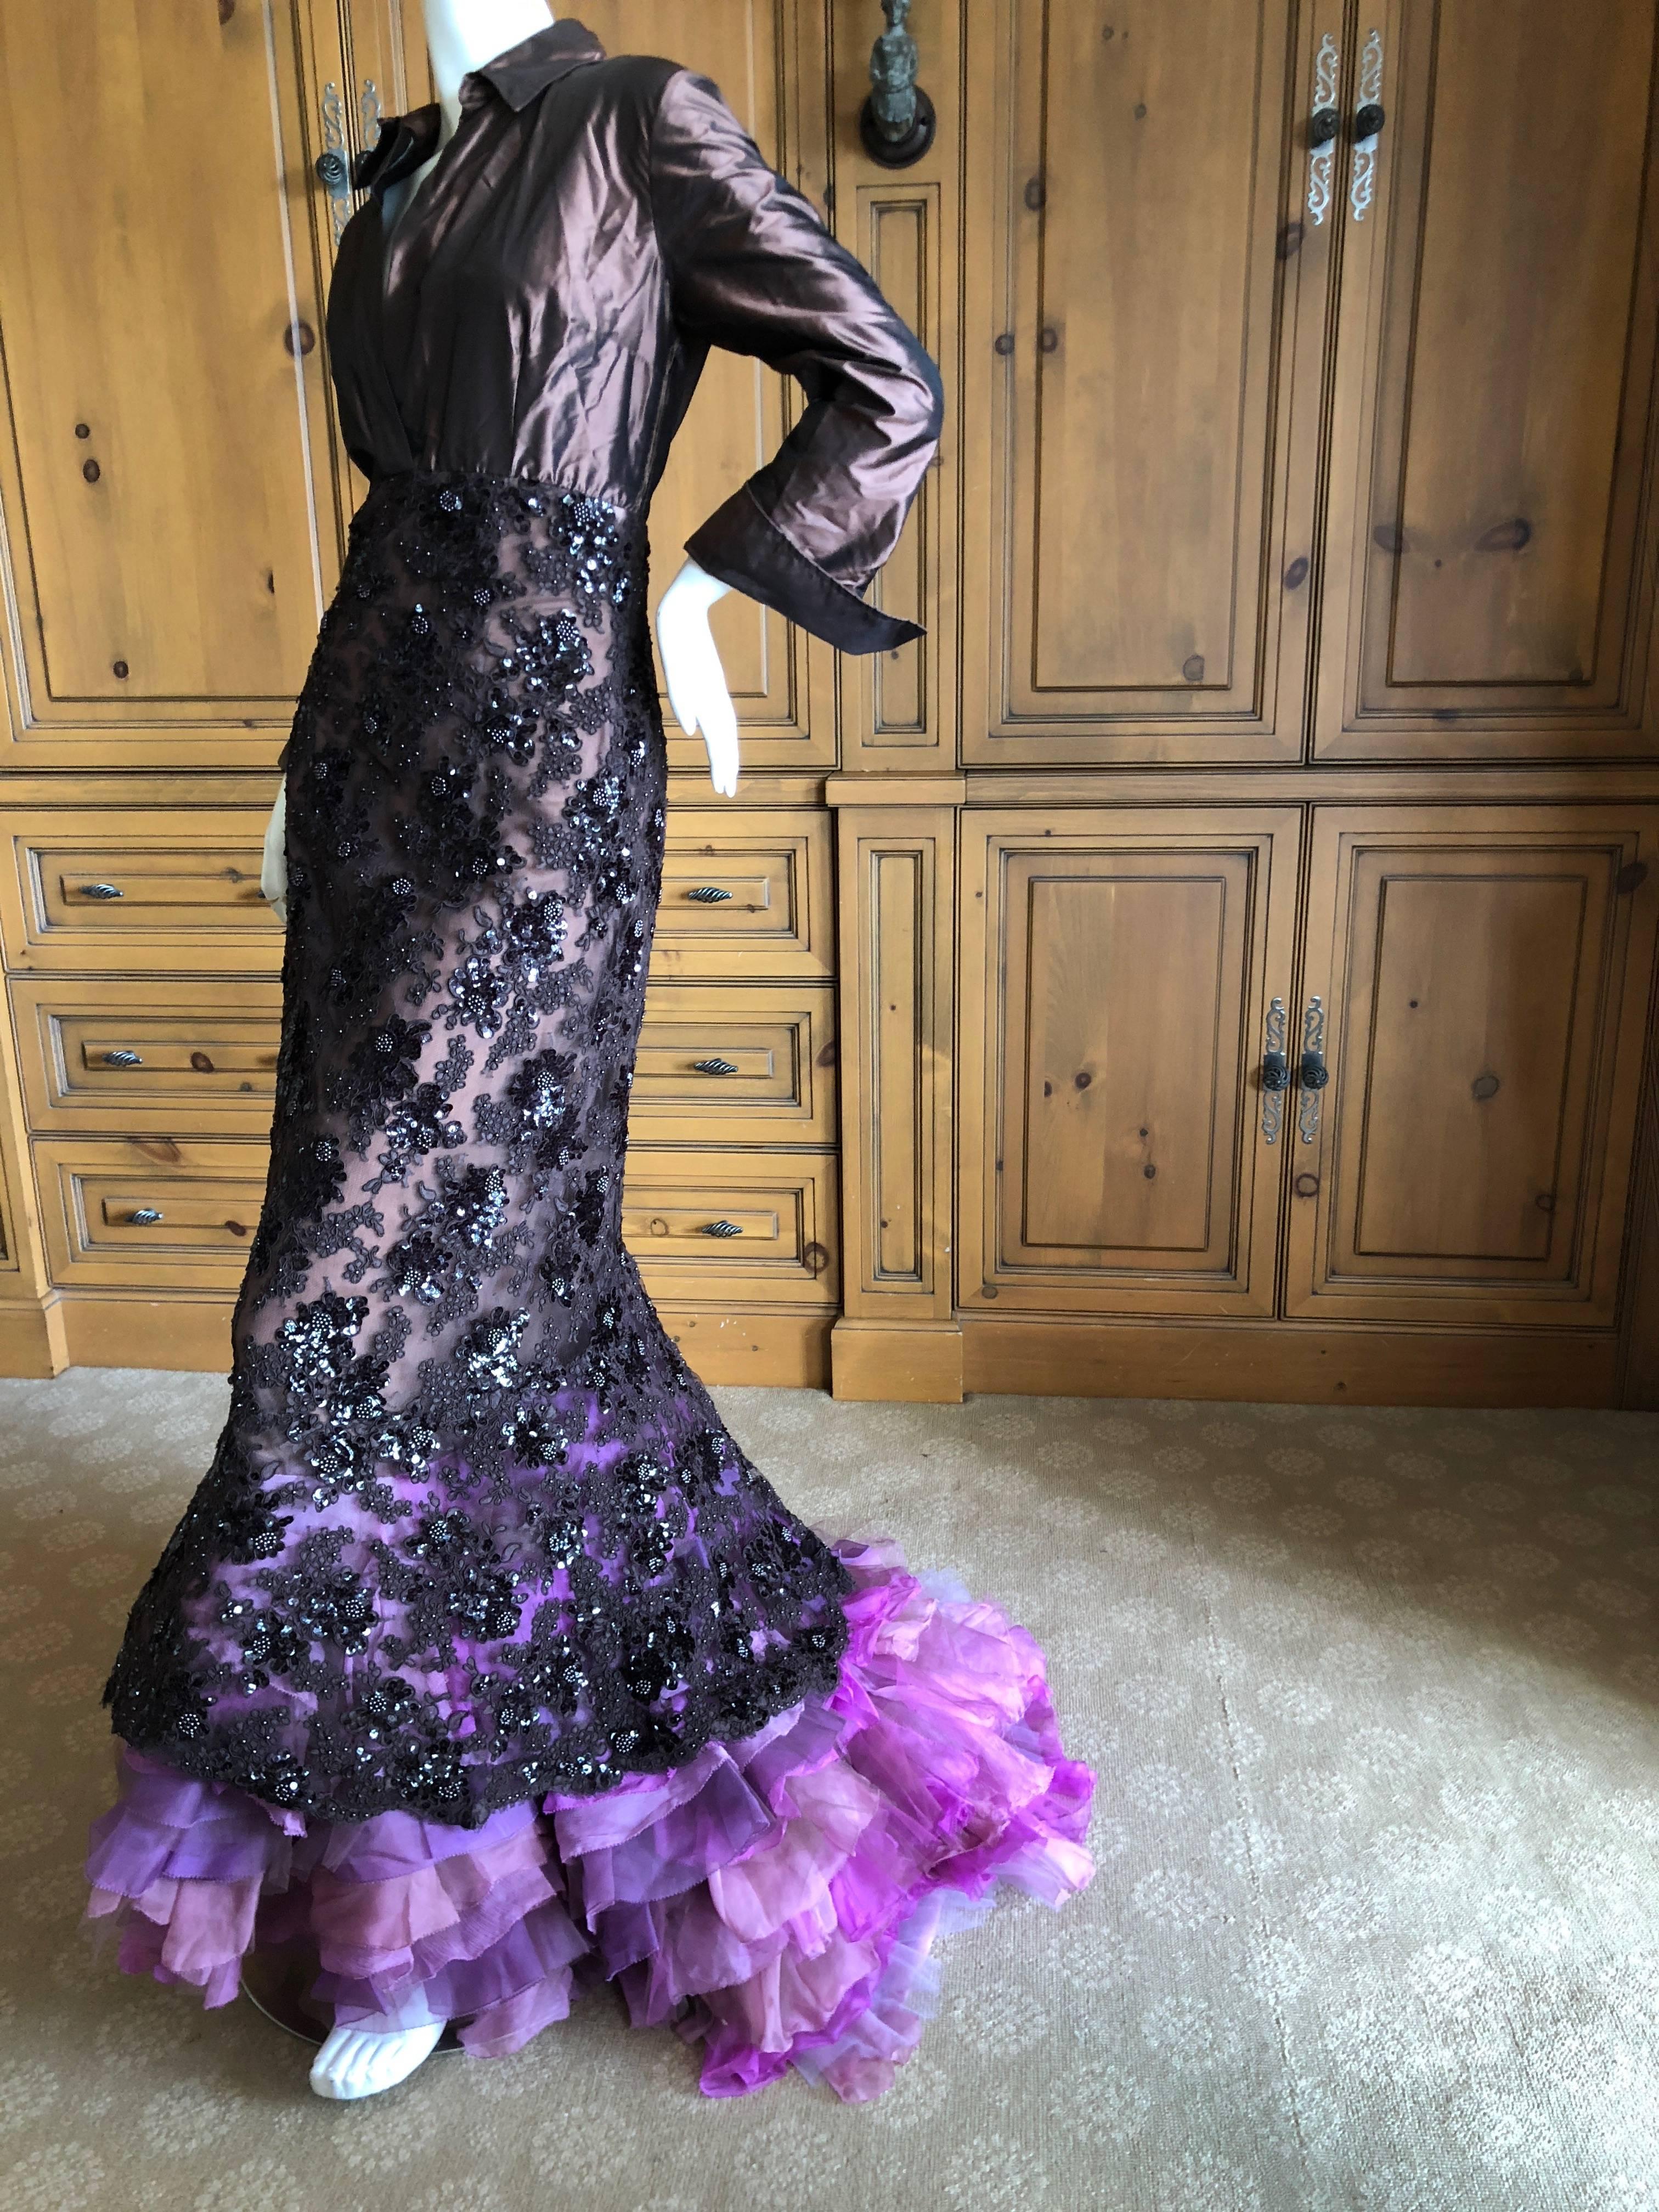 Isaac Mizrahi Embellished Evening Gown with Ruffled Flamenco Tulle Train.
This is exquisite, so much prettier in person.
Styled as a simple shirt at the top with beautiful sequin and bead embellished flowers on sheer lace, over many layers of